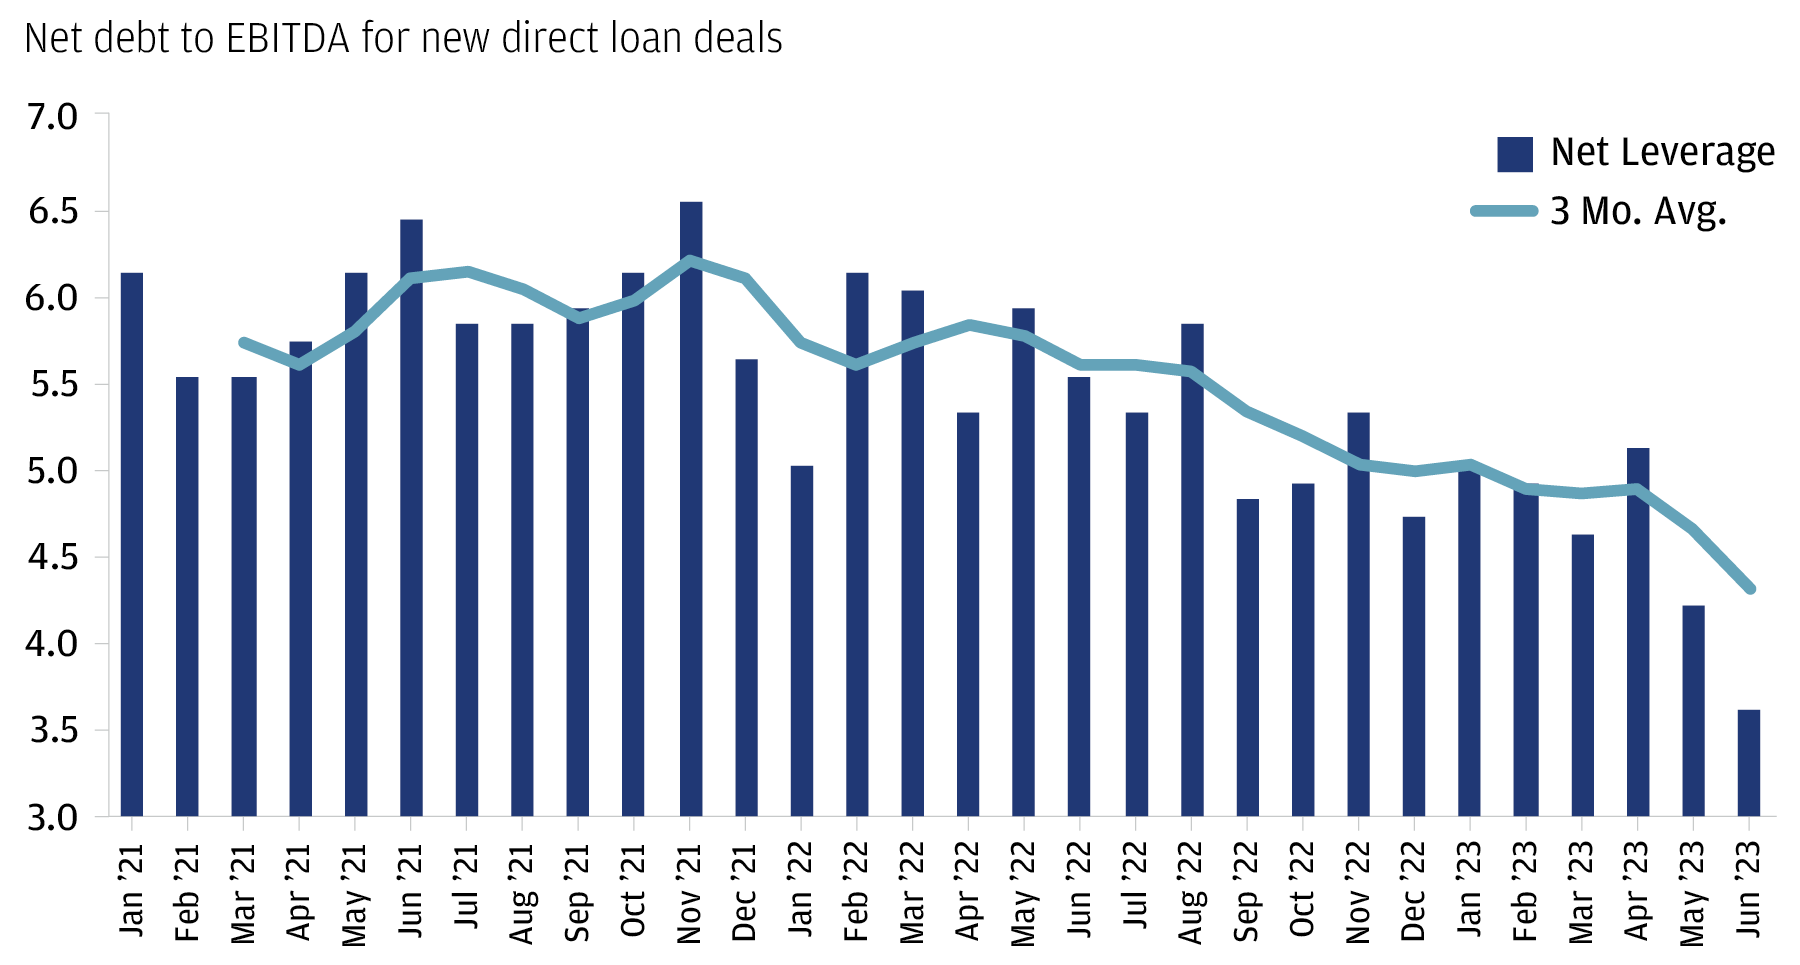  This shows issuer net leverage, or the ratio of net debt to EBITDA, for new private credit deals.